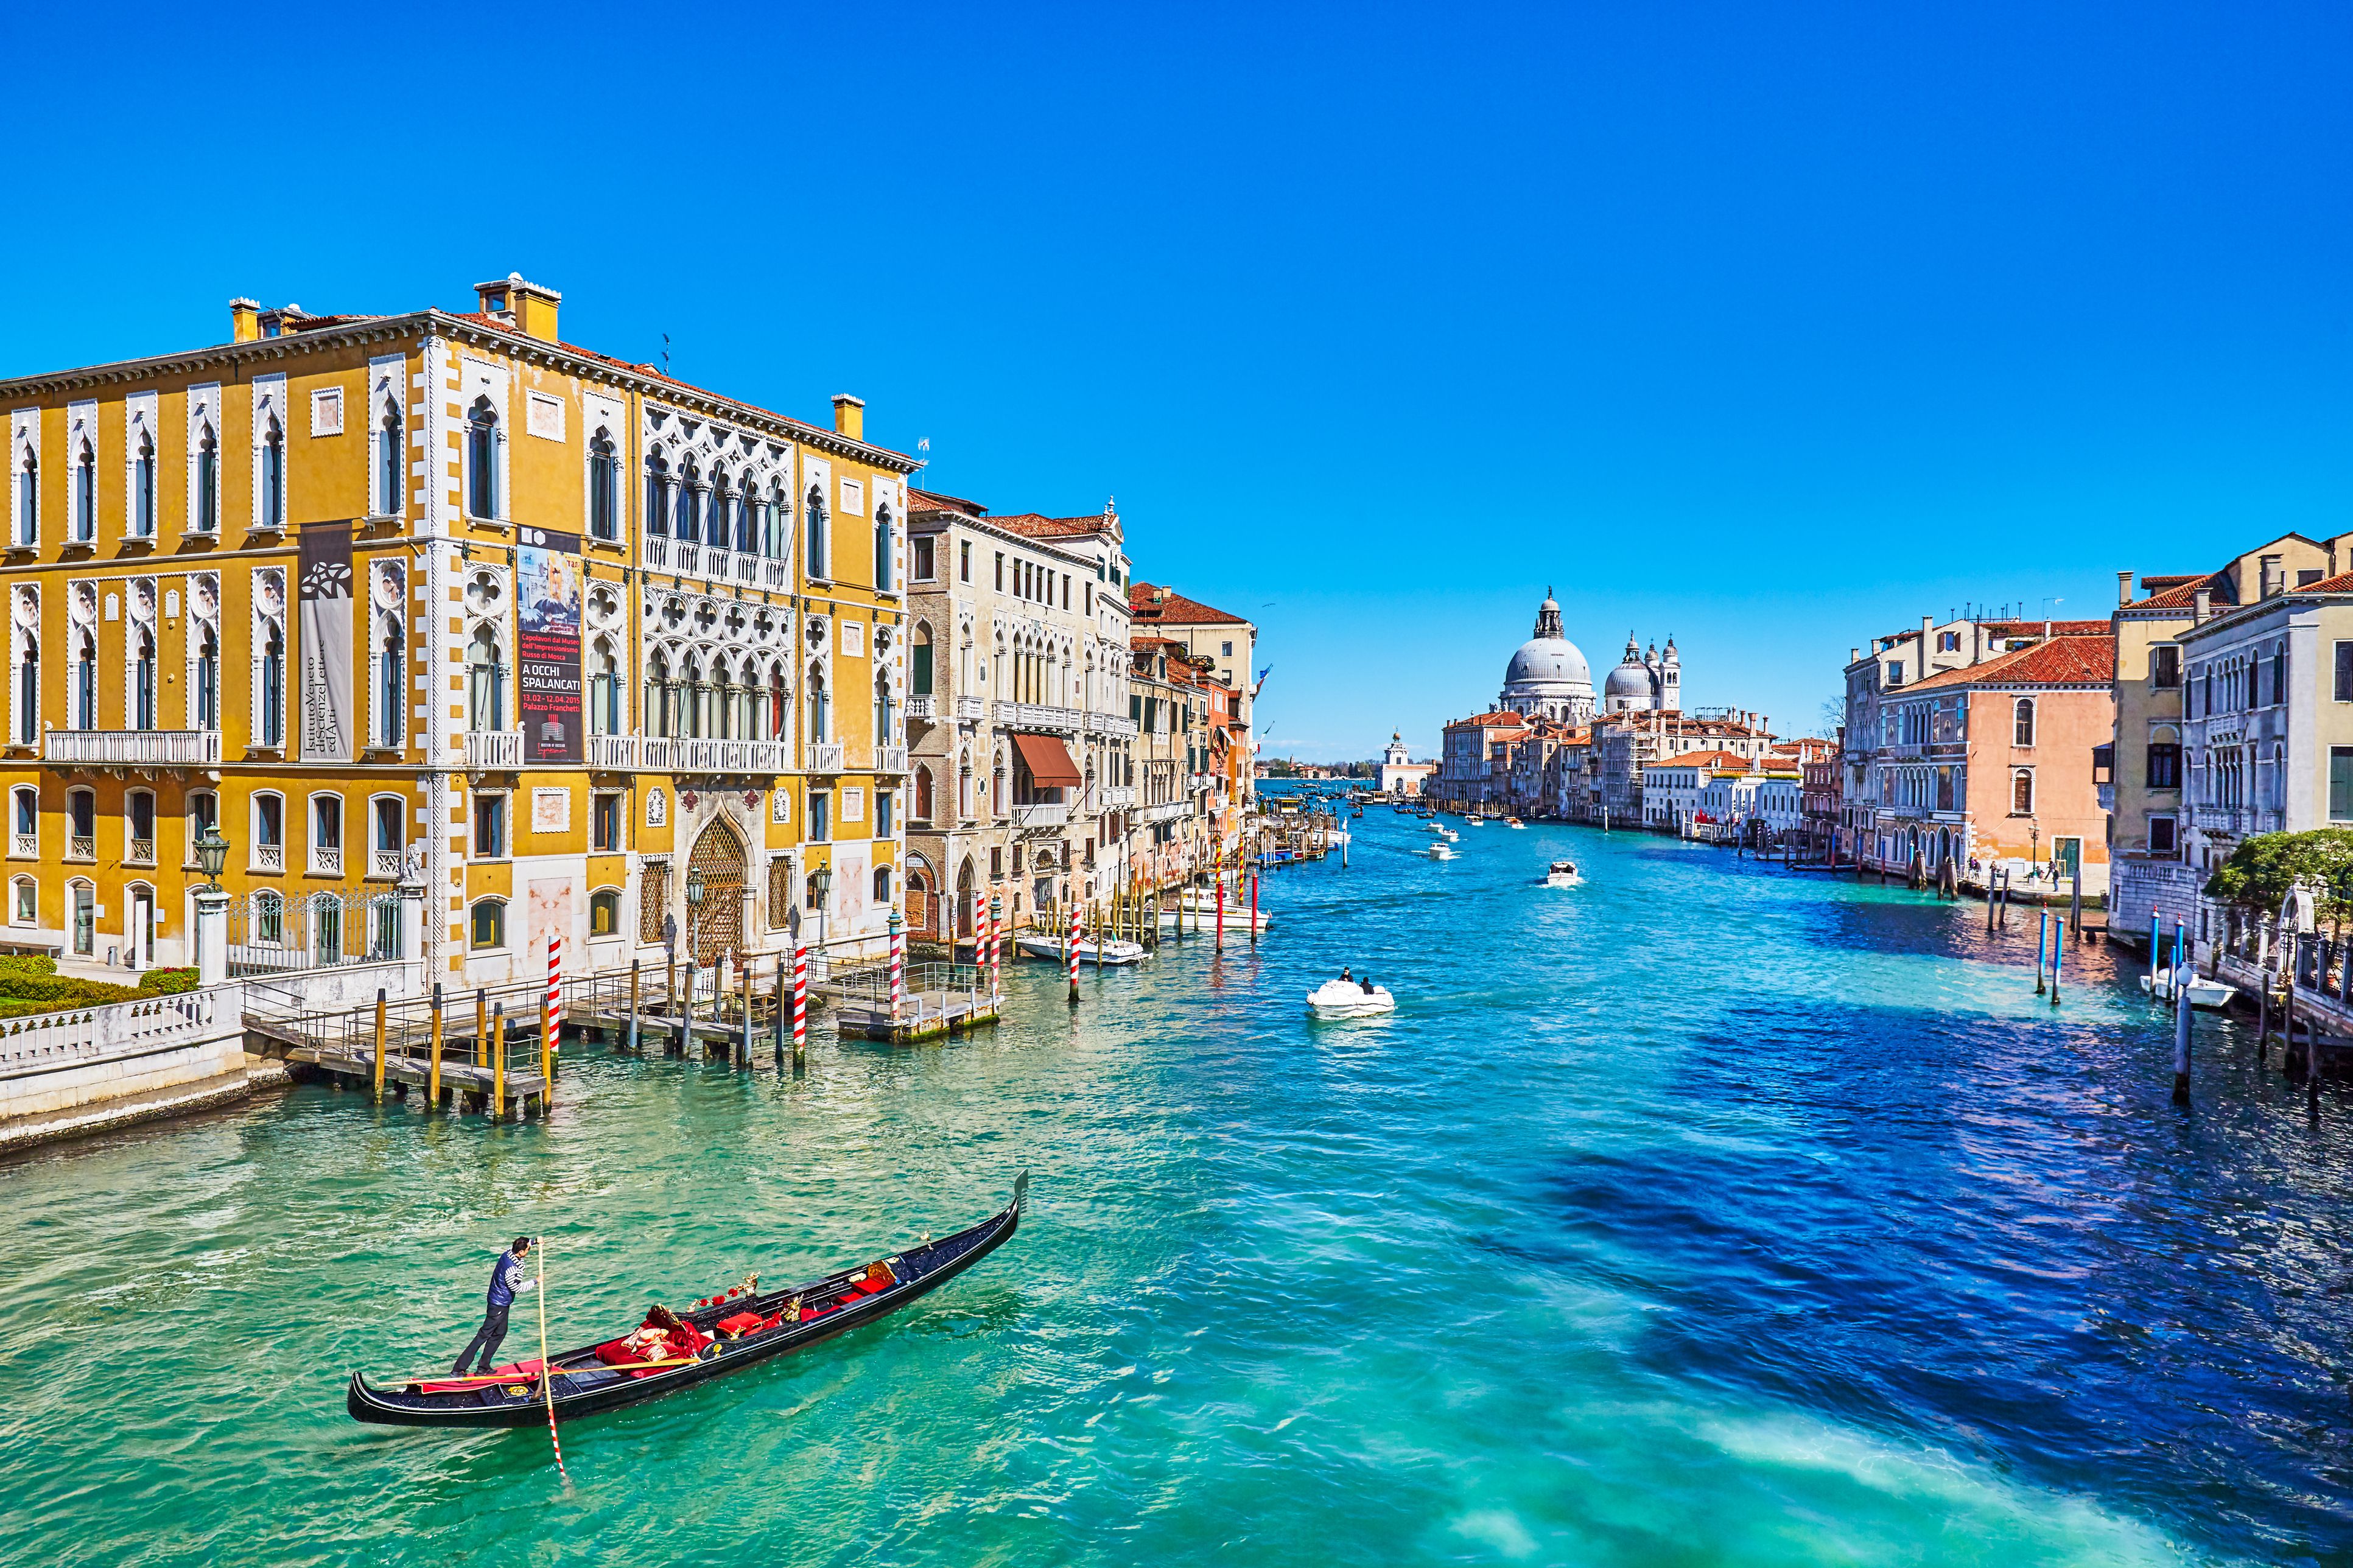 best places to visit in italy november